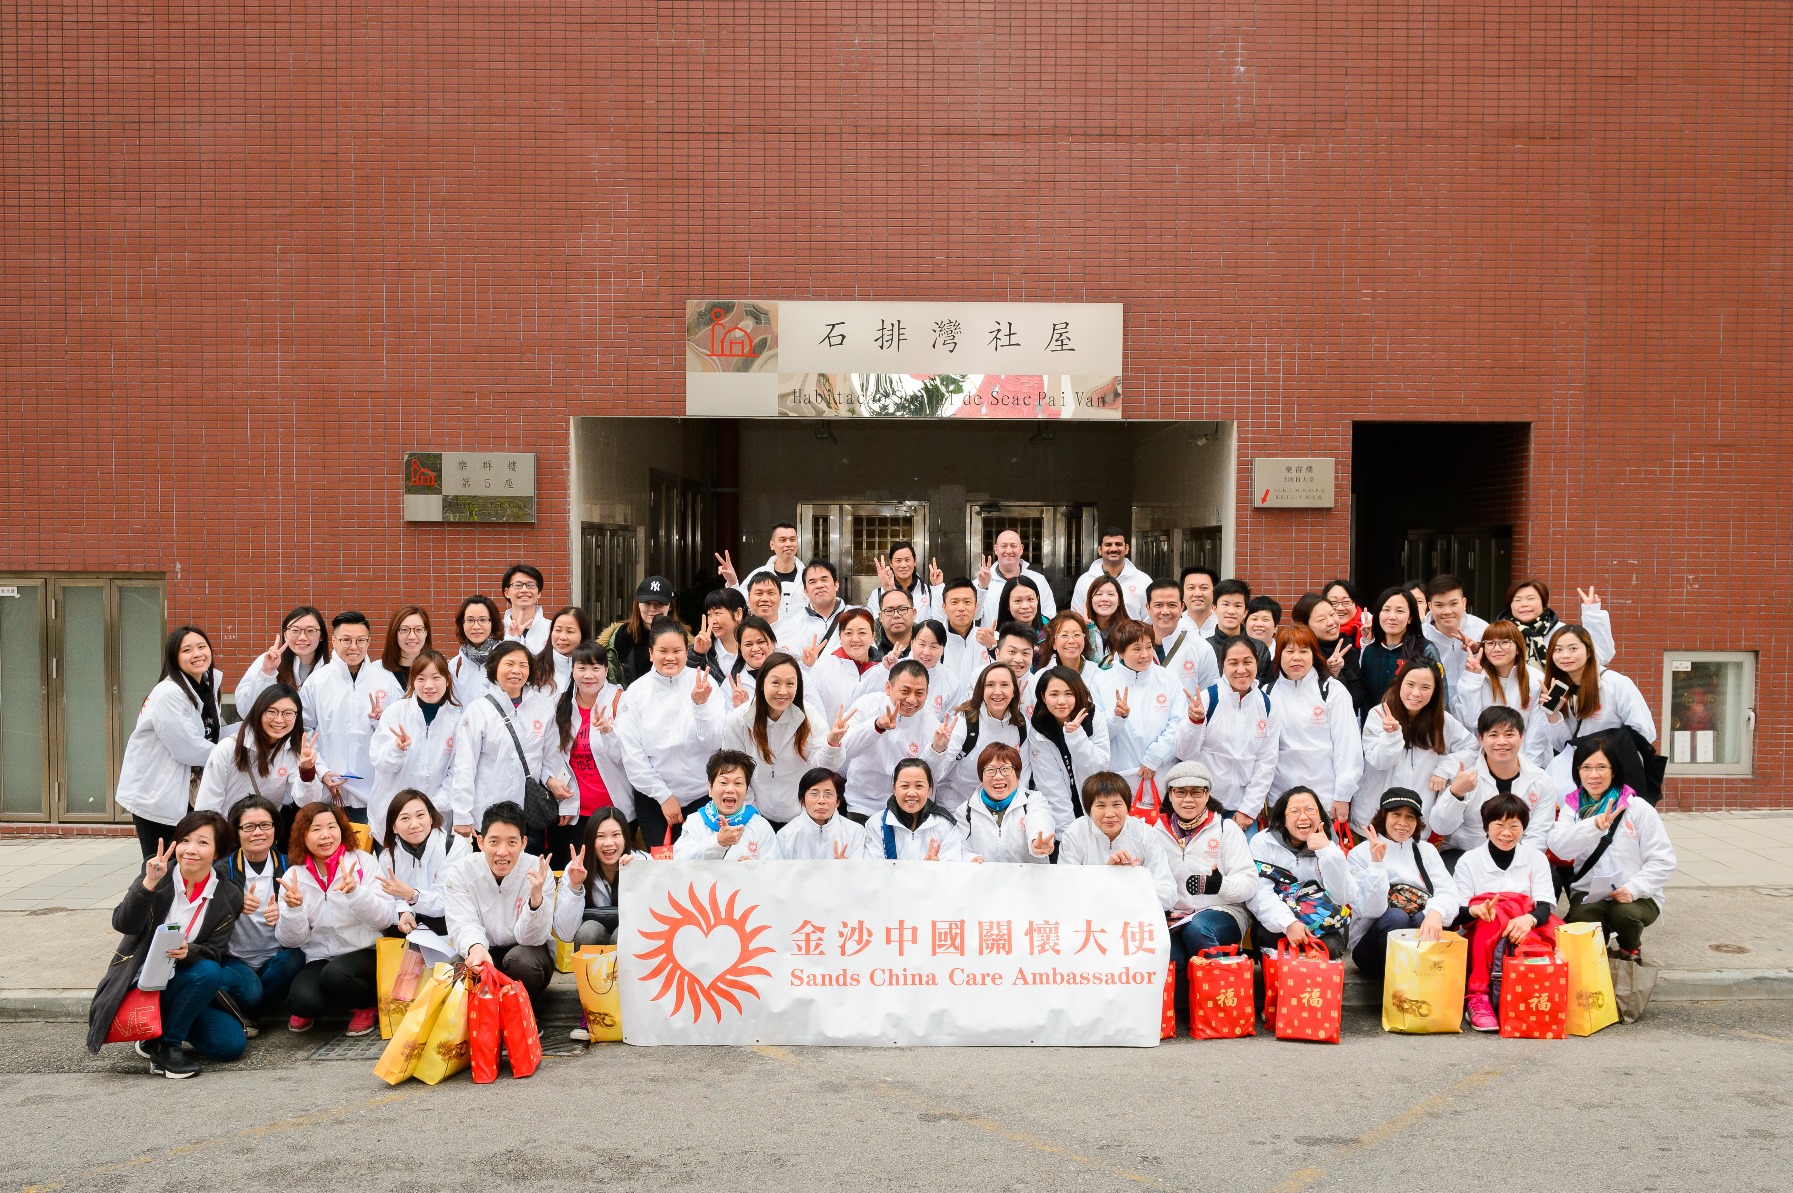 Sands China Does Annual Spring Cleaning with Macao Elderly